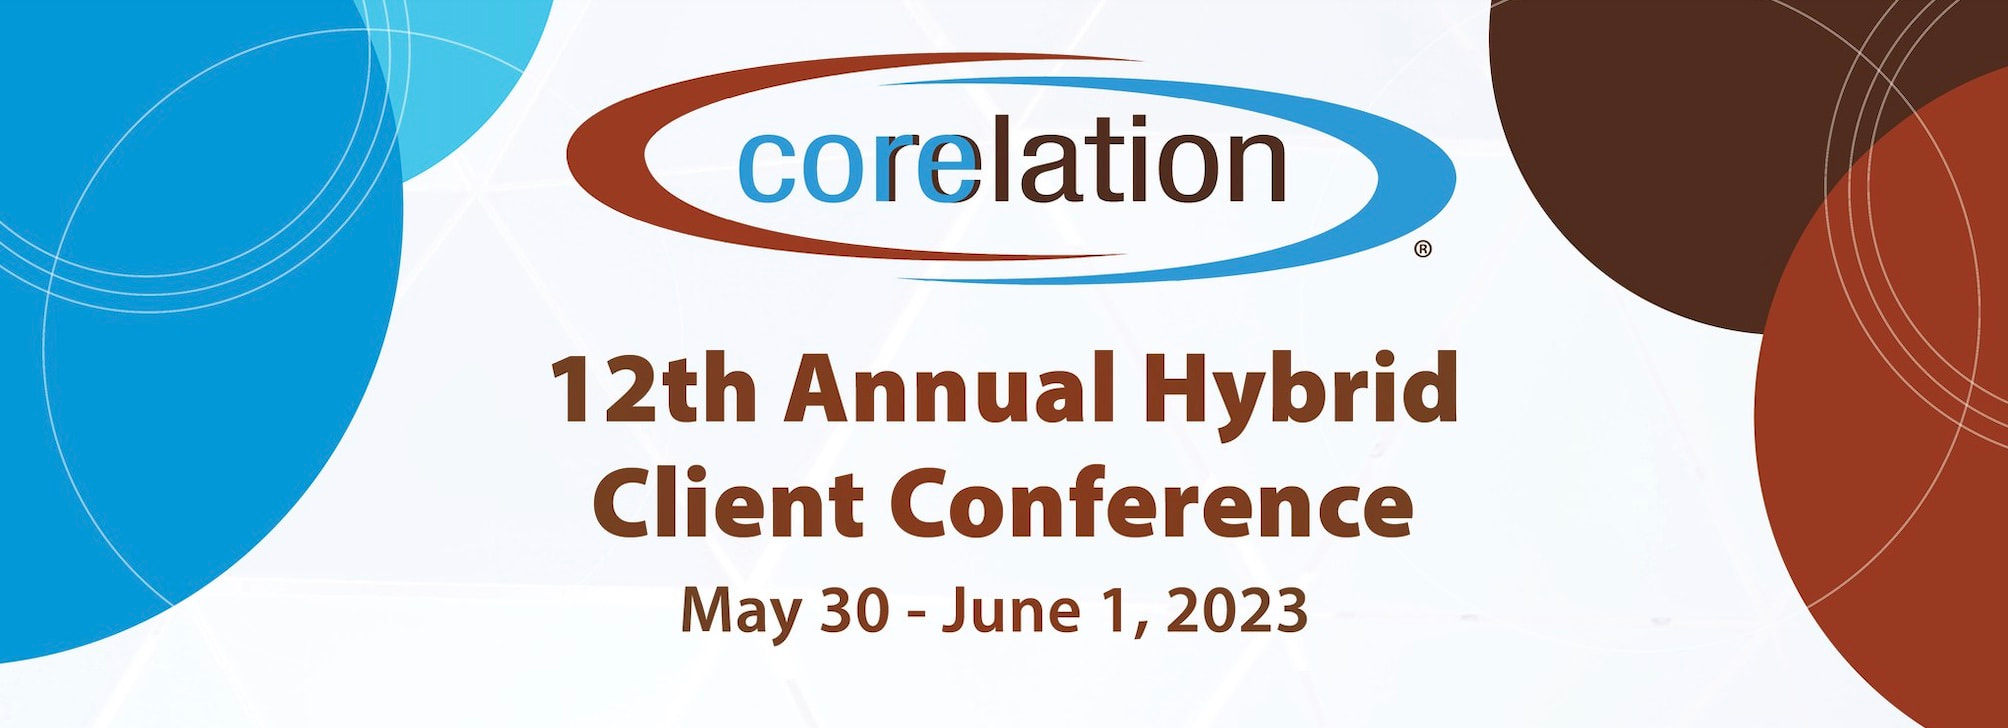 2023 Corelation Annual Hybrid Client Conference